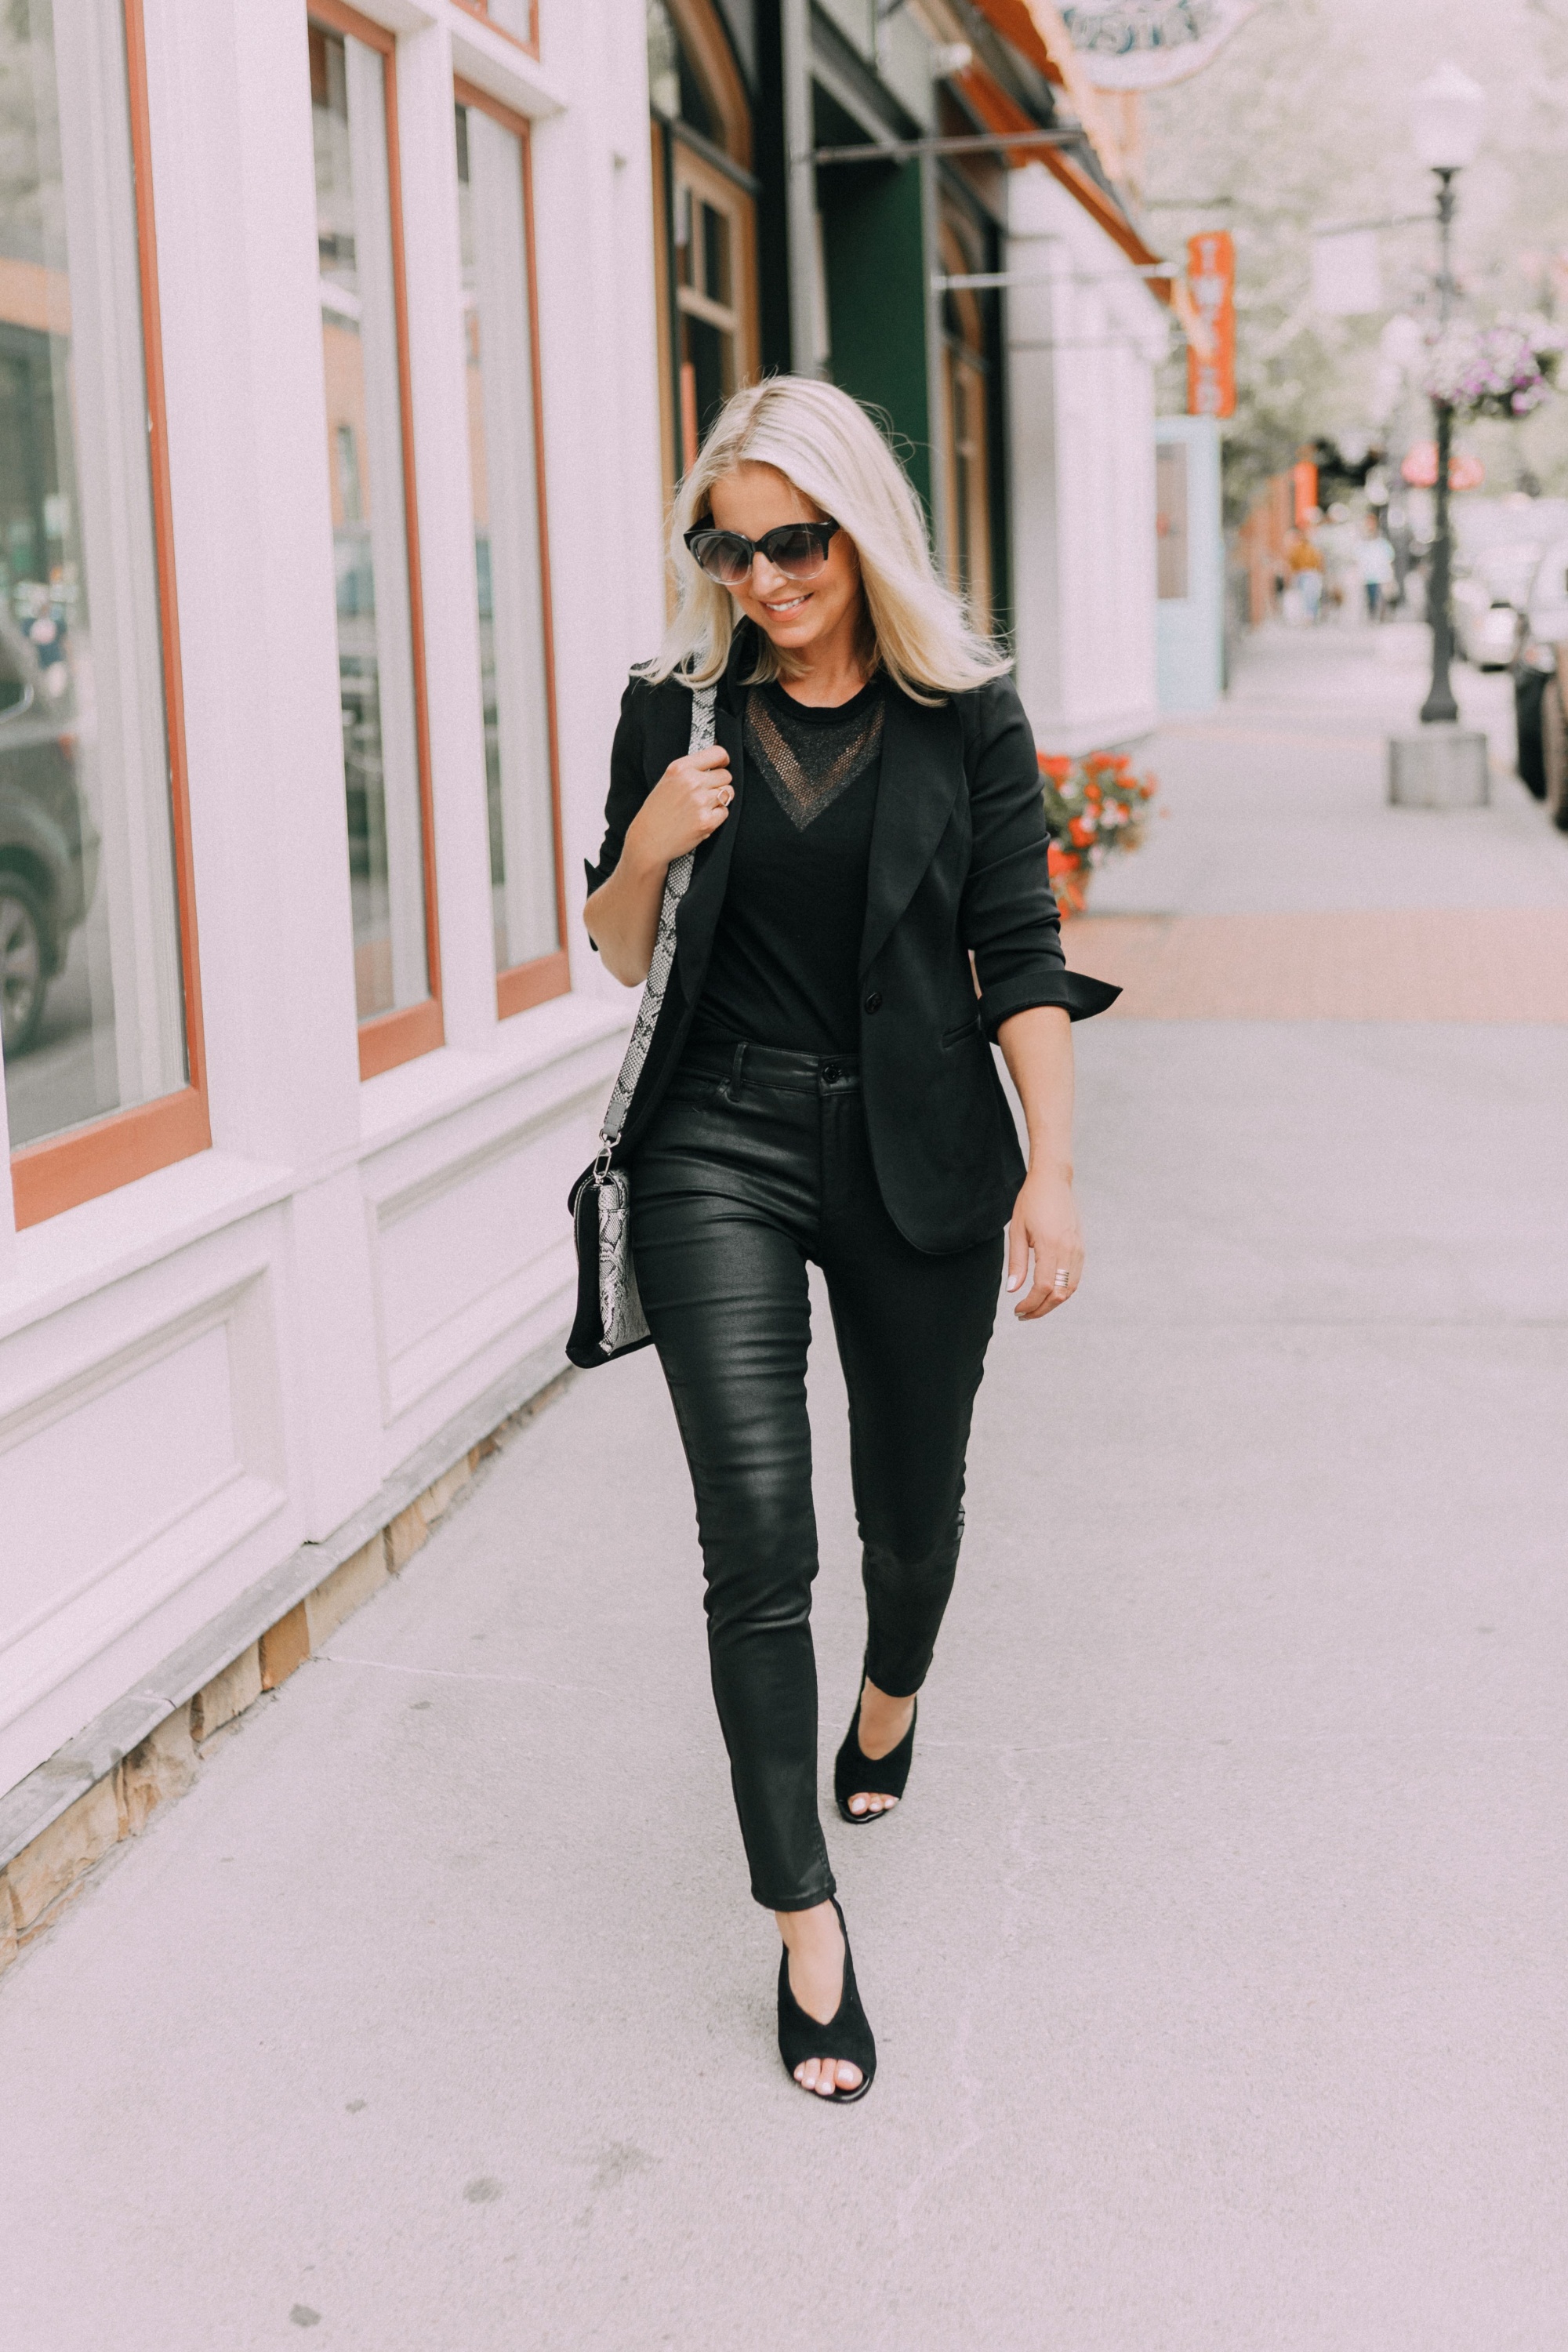 Coated Jeans in petite sizes, Fashion blogger Erin Busbee of BusbeeStyle.com wearing a head to toe all-black look by White House Black Market including coated jeans, python accented bag and heels, sleeveless sweater, and black blazer in Telluride, CO